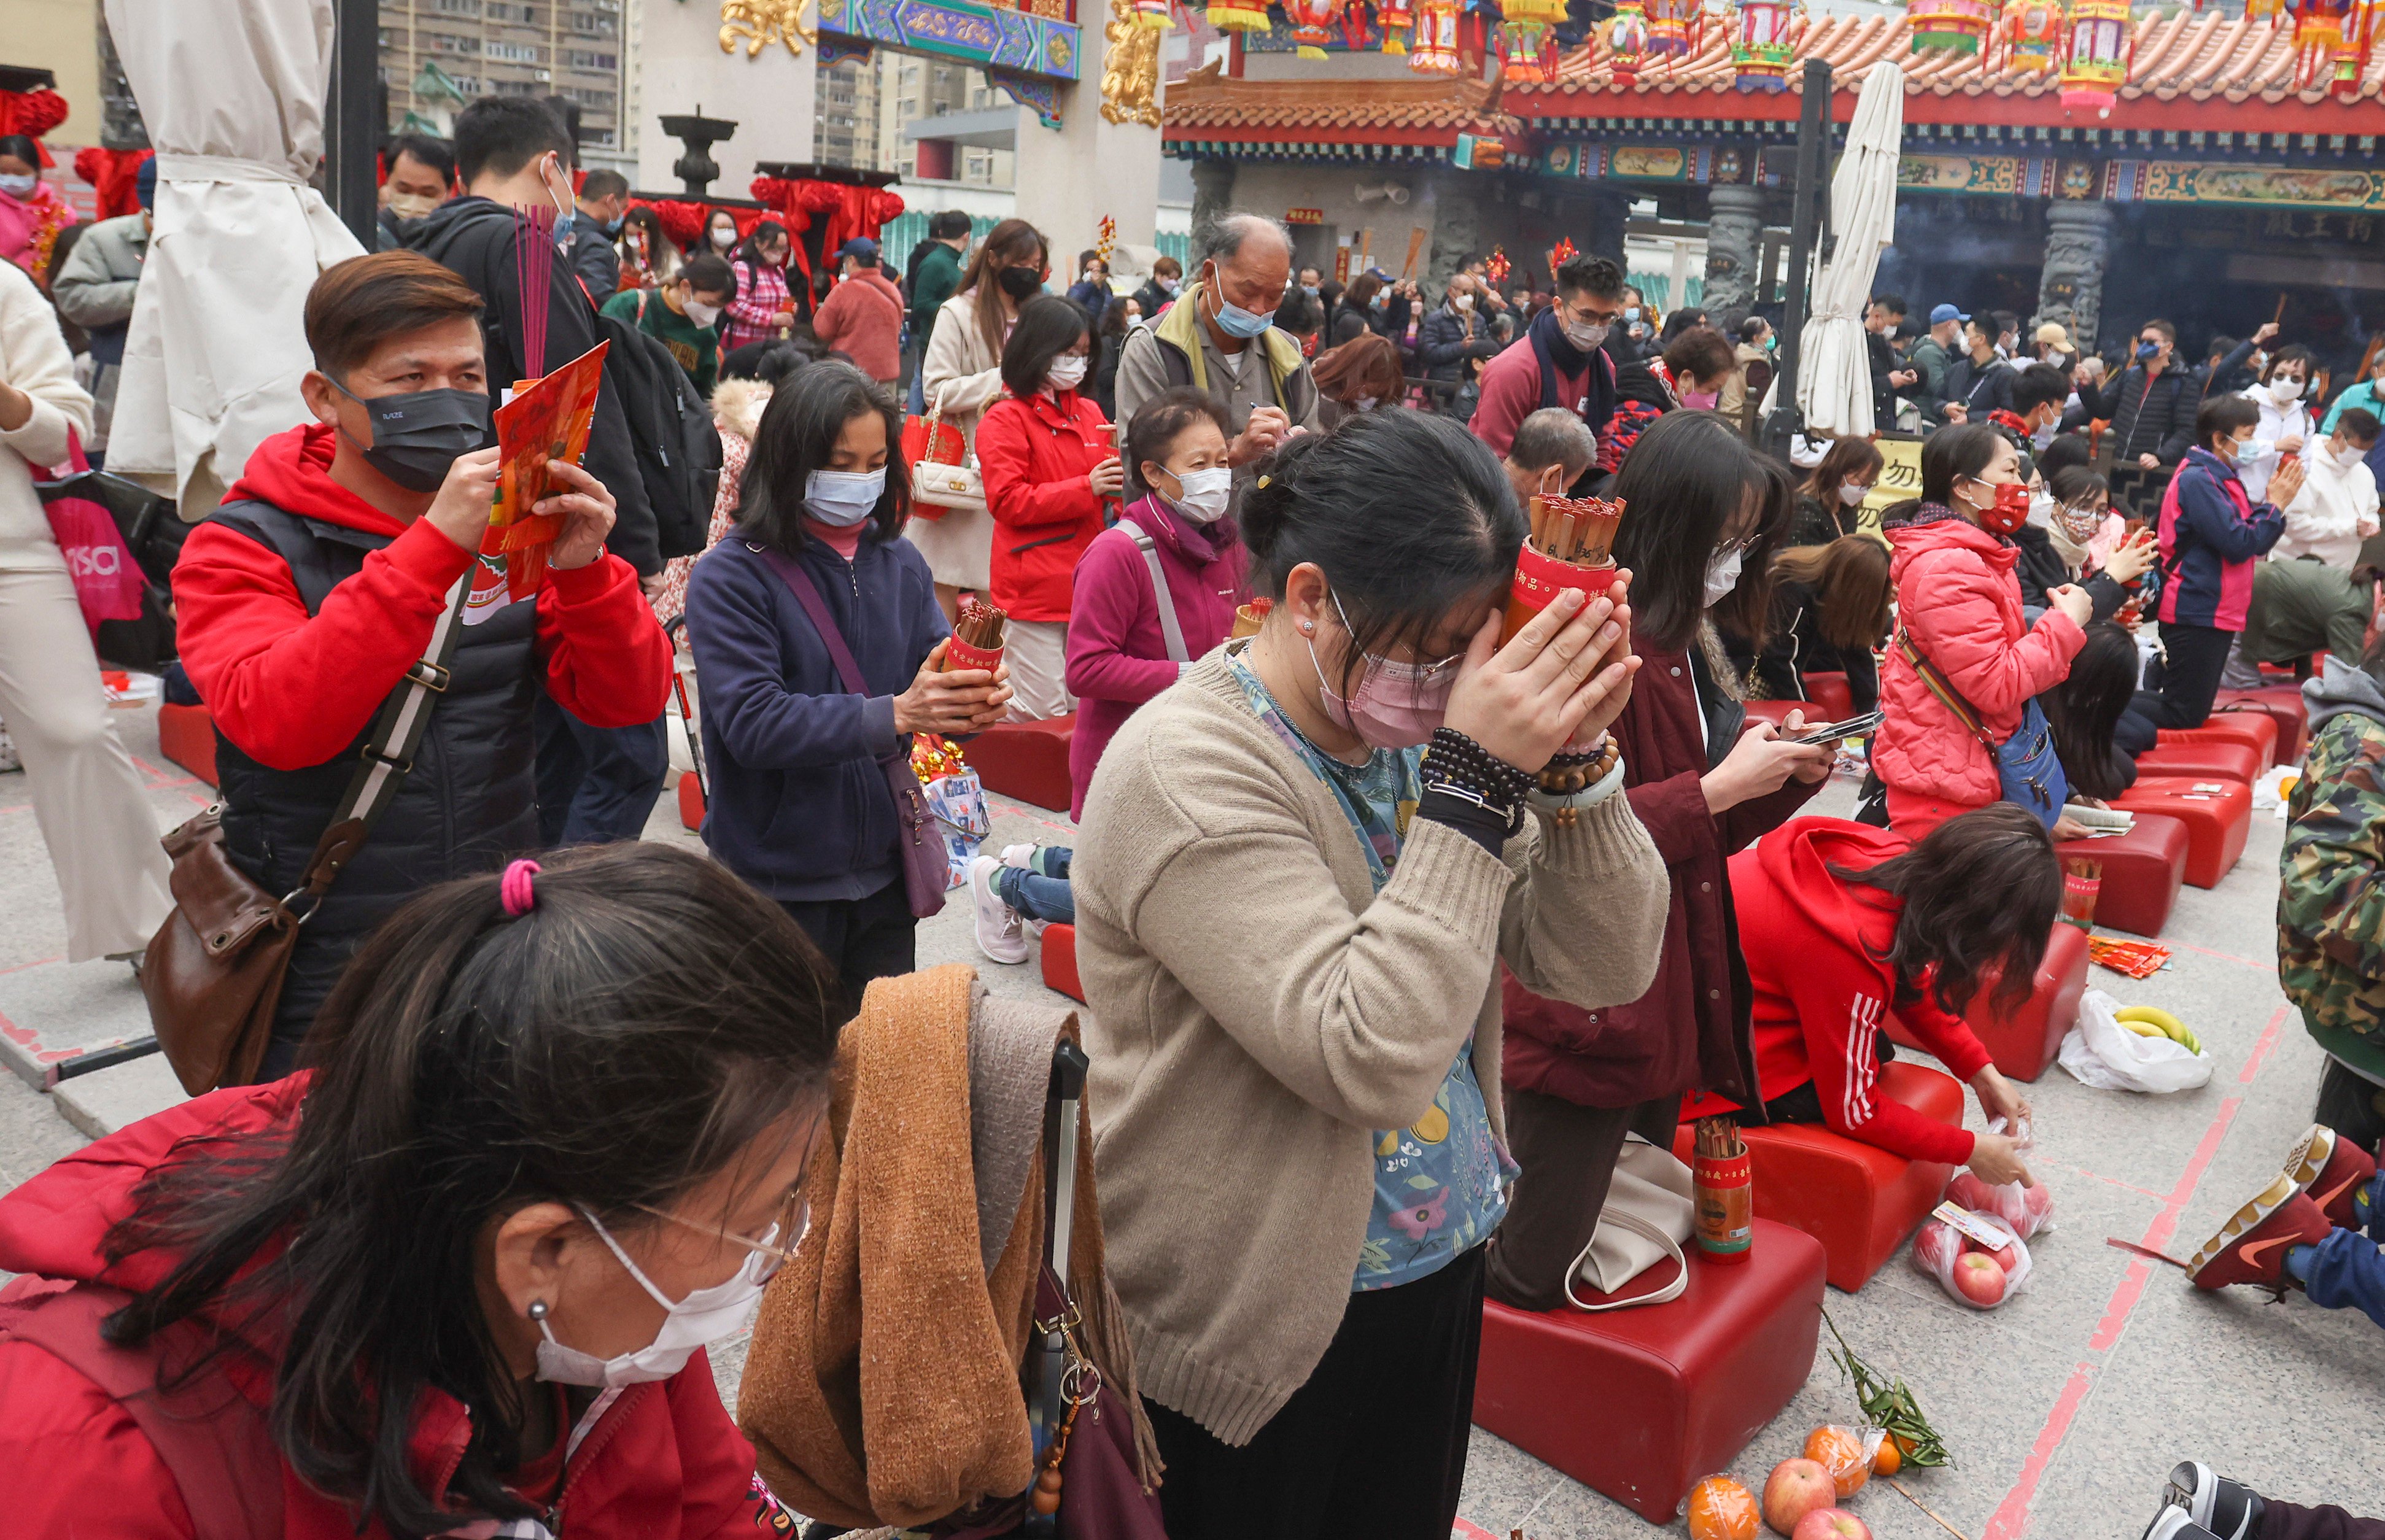 Worshippers pray at Wong Tai Sin Temple in Hong Kong on the fourth day of the Lunar New Year holidays on January 25, 2023. Photo: Jonathan Wong